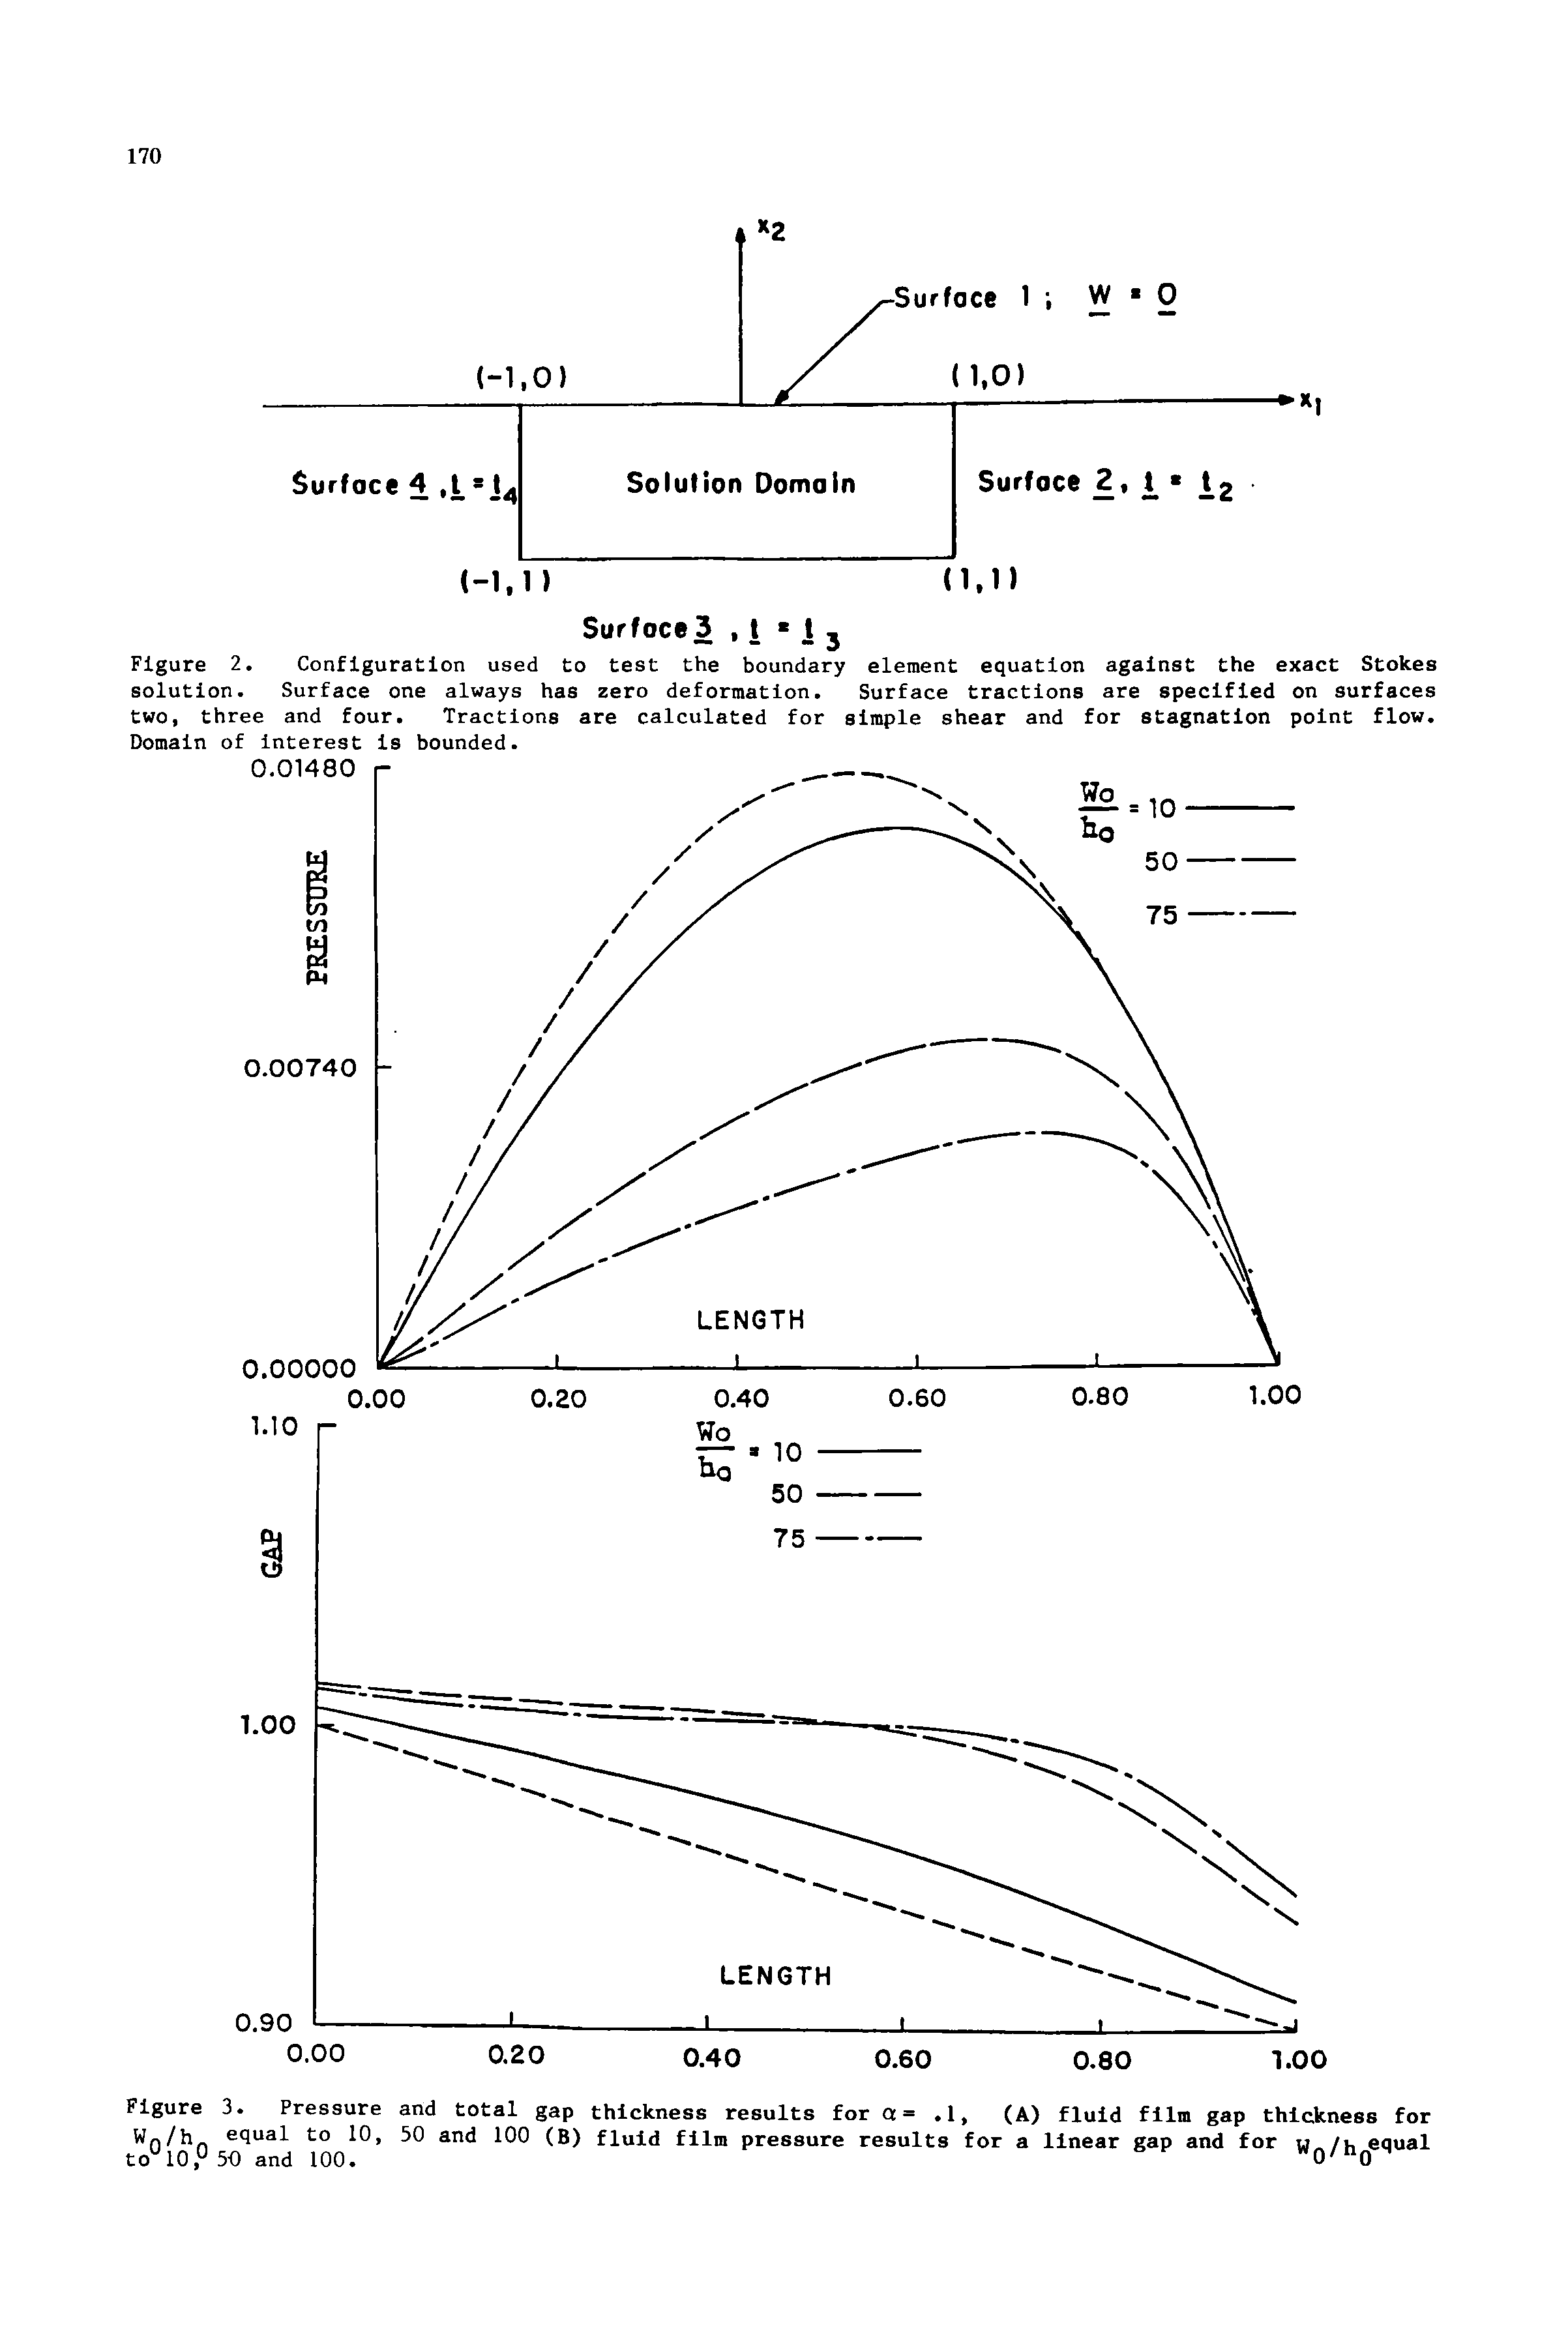 Figure 2. Configuration used to test the boundary element equation against the exact Stokes solution. Surface one always has zero deformation. Surface tractions are specified on surfaces two, three and four. Tractions are calculated for simple shear and for stagnation point flow. Domain of Interest Is bounded.